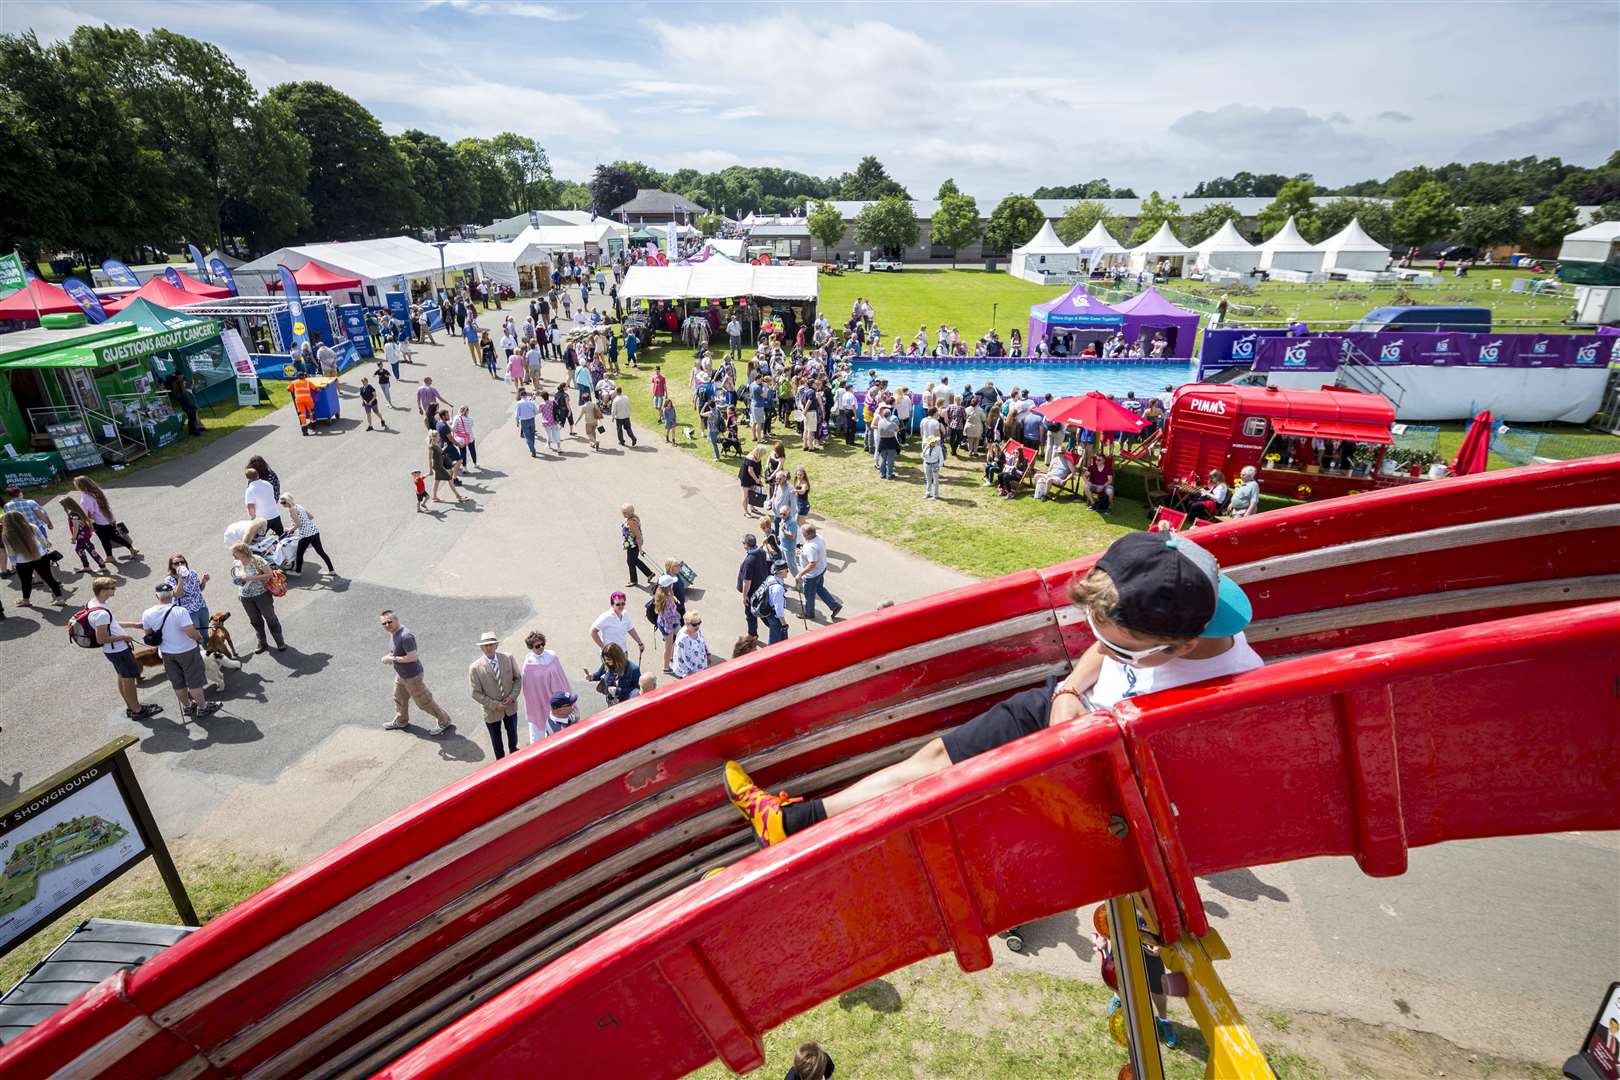 The show, hosted in Detling, will have a family fairground and children's activities. Picture: Thomas Alexander